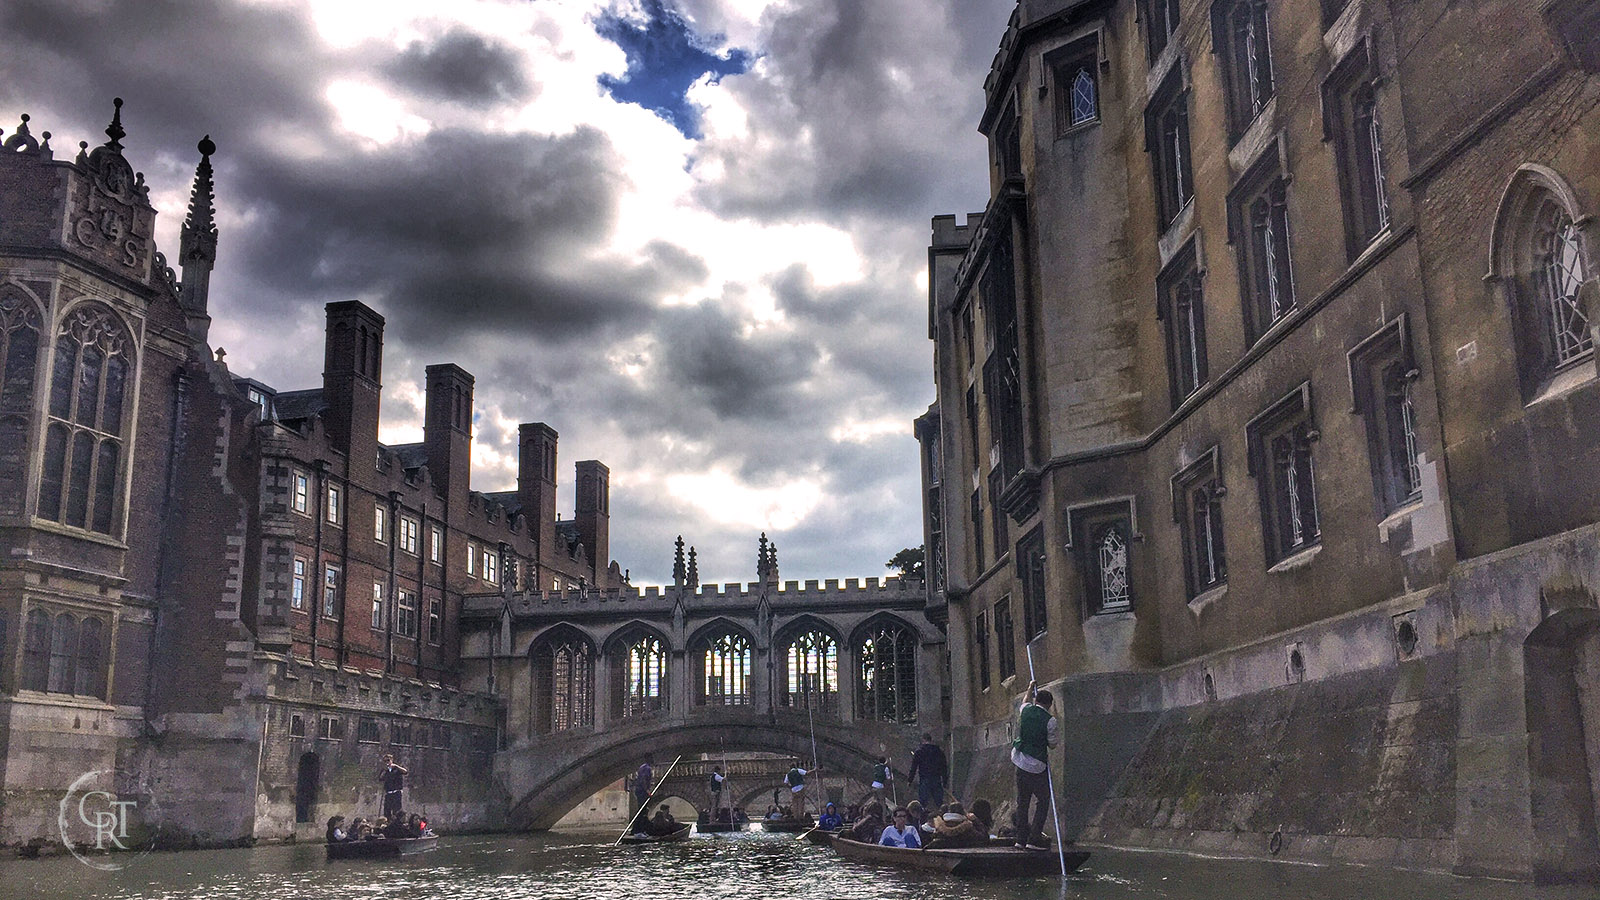 Bridge of Sighs, as seen from a punt